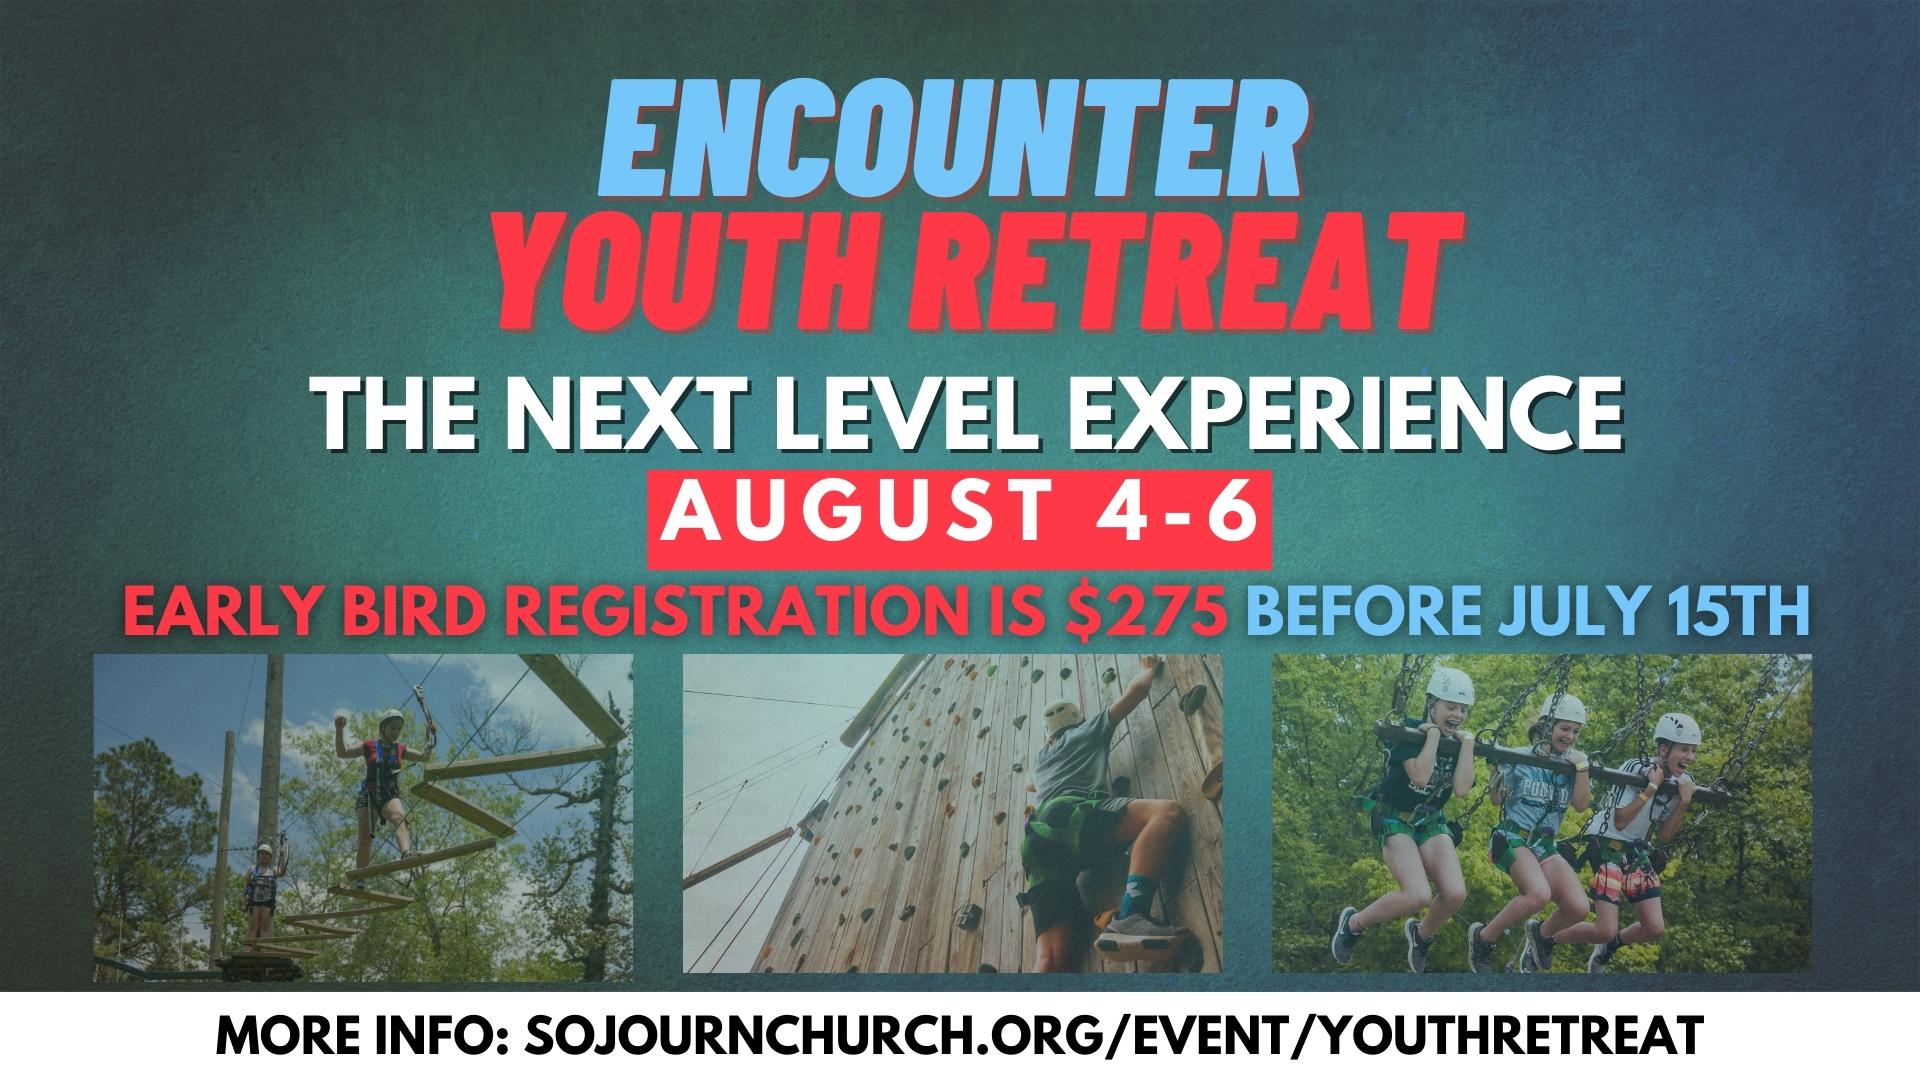 Encounter Retreat: The Next Level Experience for Youth